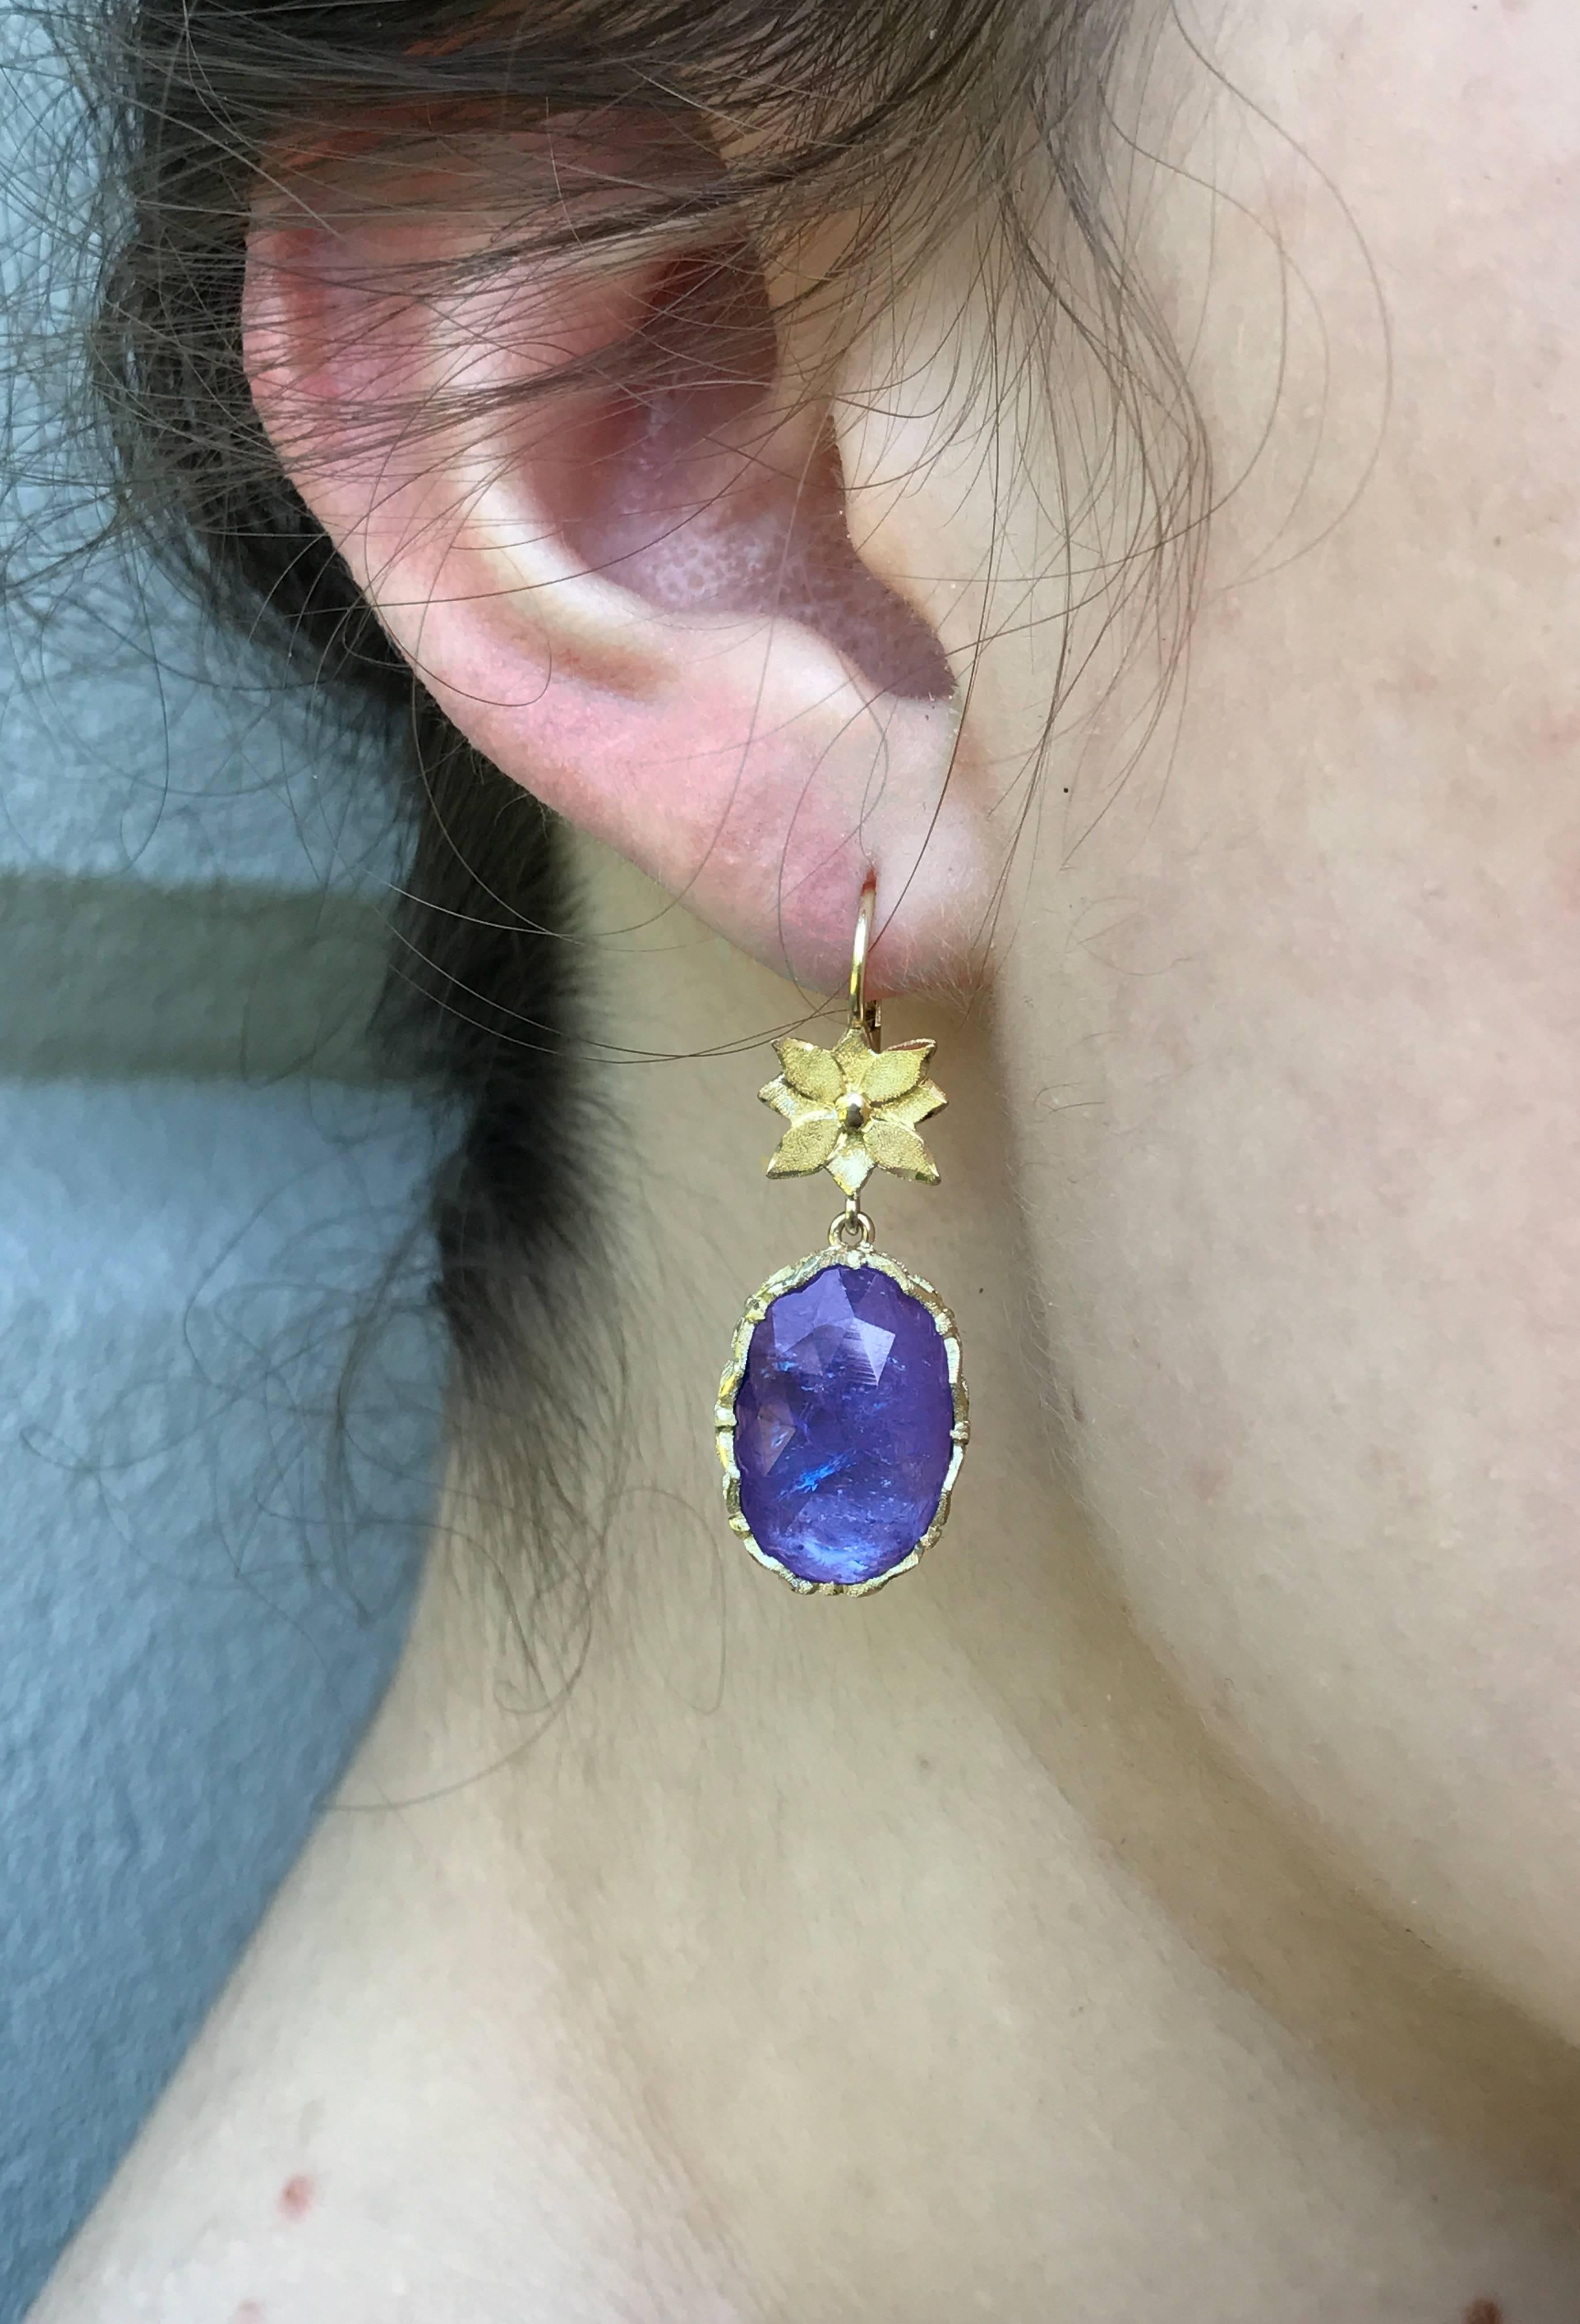 Dalben design 18 kt leaf hand engraved yellow gold dangle earrings with two oval faceted Tanzanite weighting 13,3 carat 
The yello gold satin finishing is hand made by 